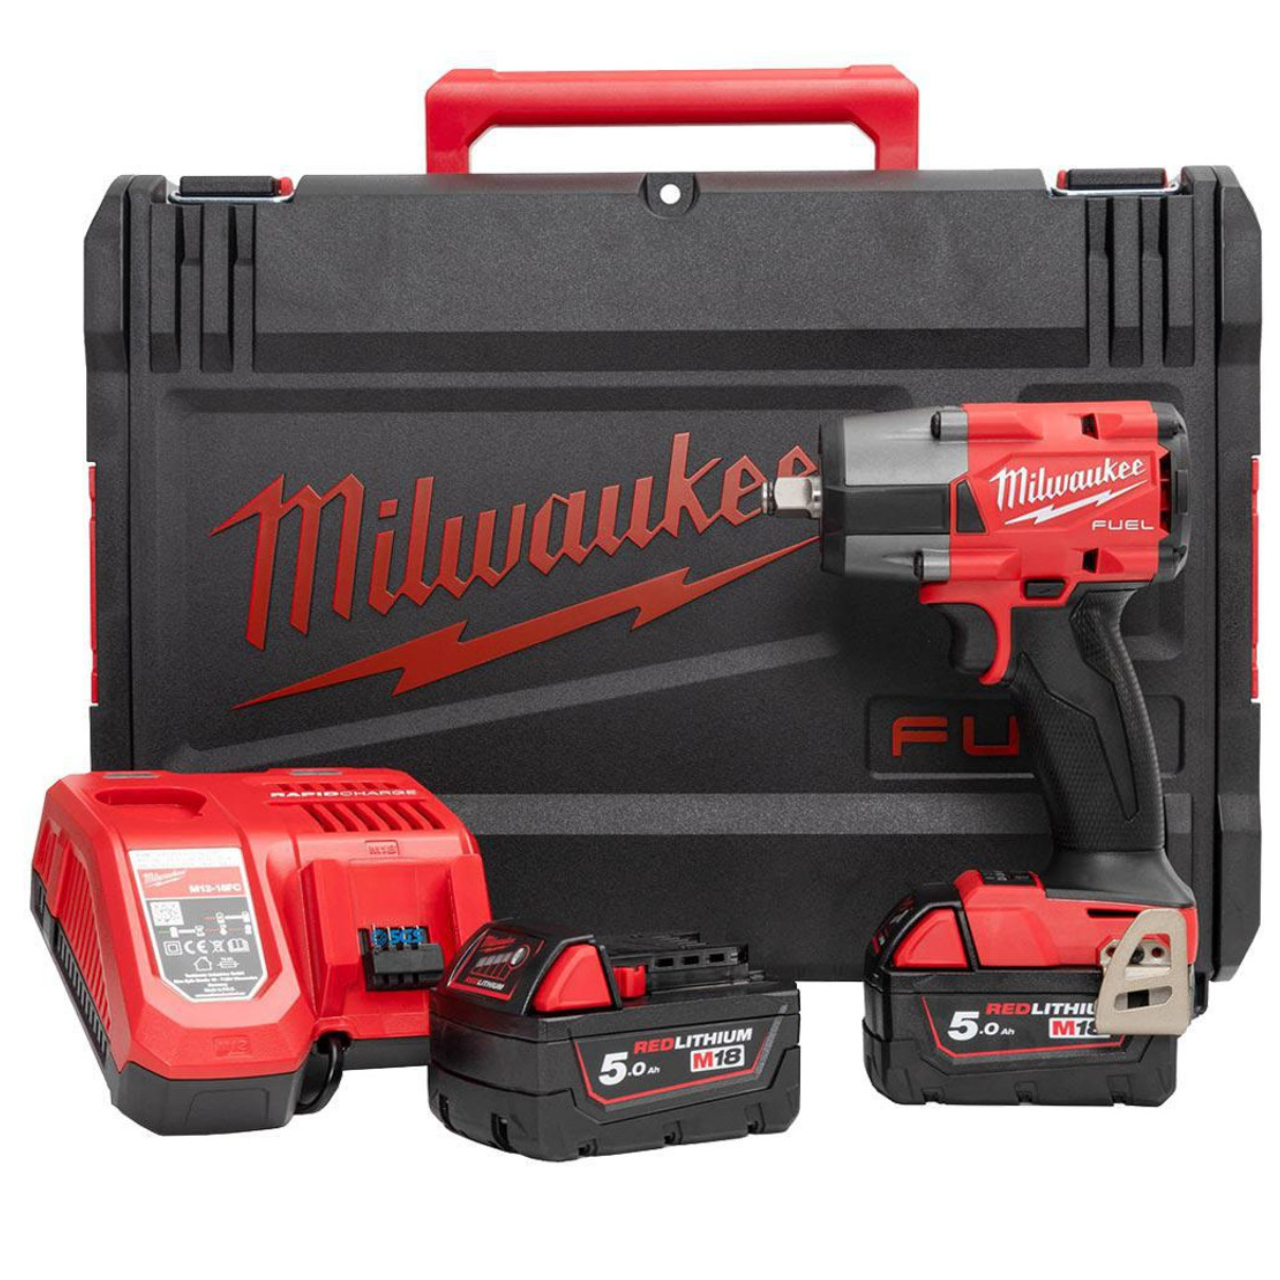 MILWAUKEE FUEL™ 1/2" MID-TORQUE IMPACT WRENCH With FRICTION RING 2 X 18V 5.0AH LI-ION FMTIW2F12-502X